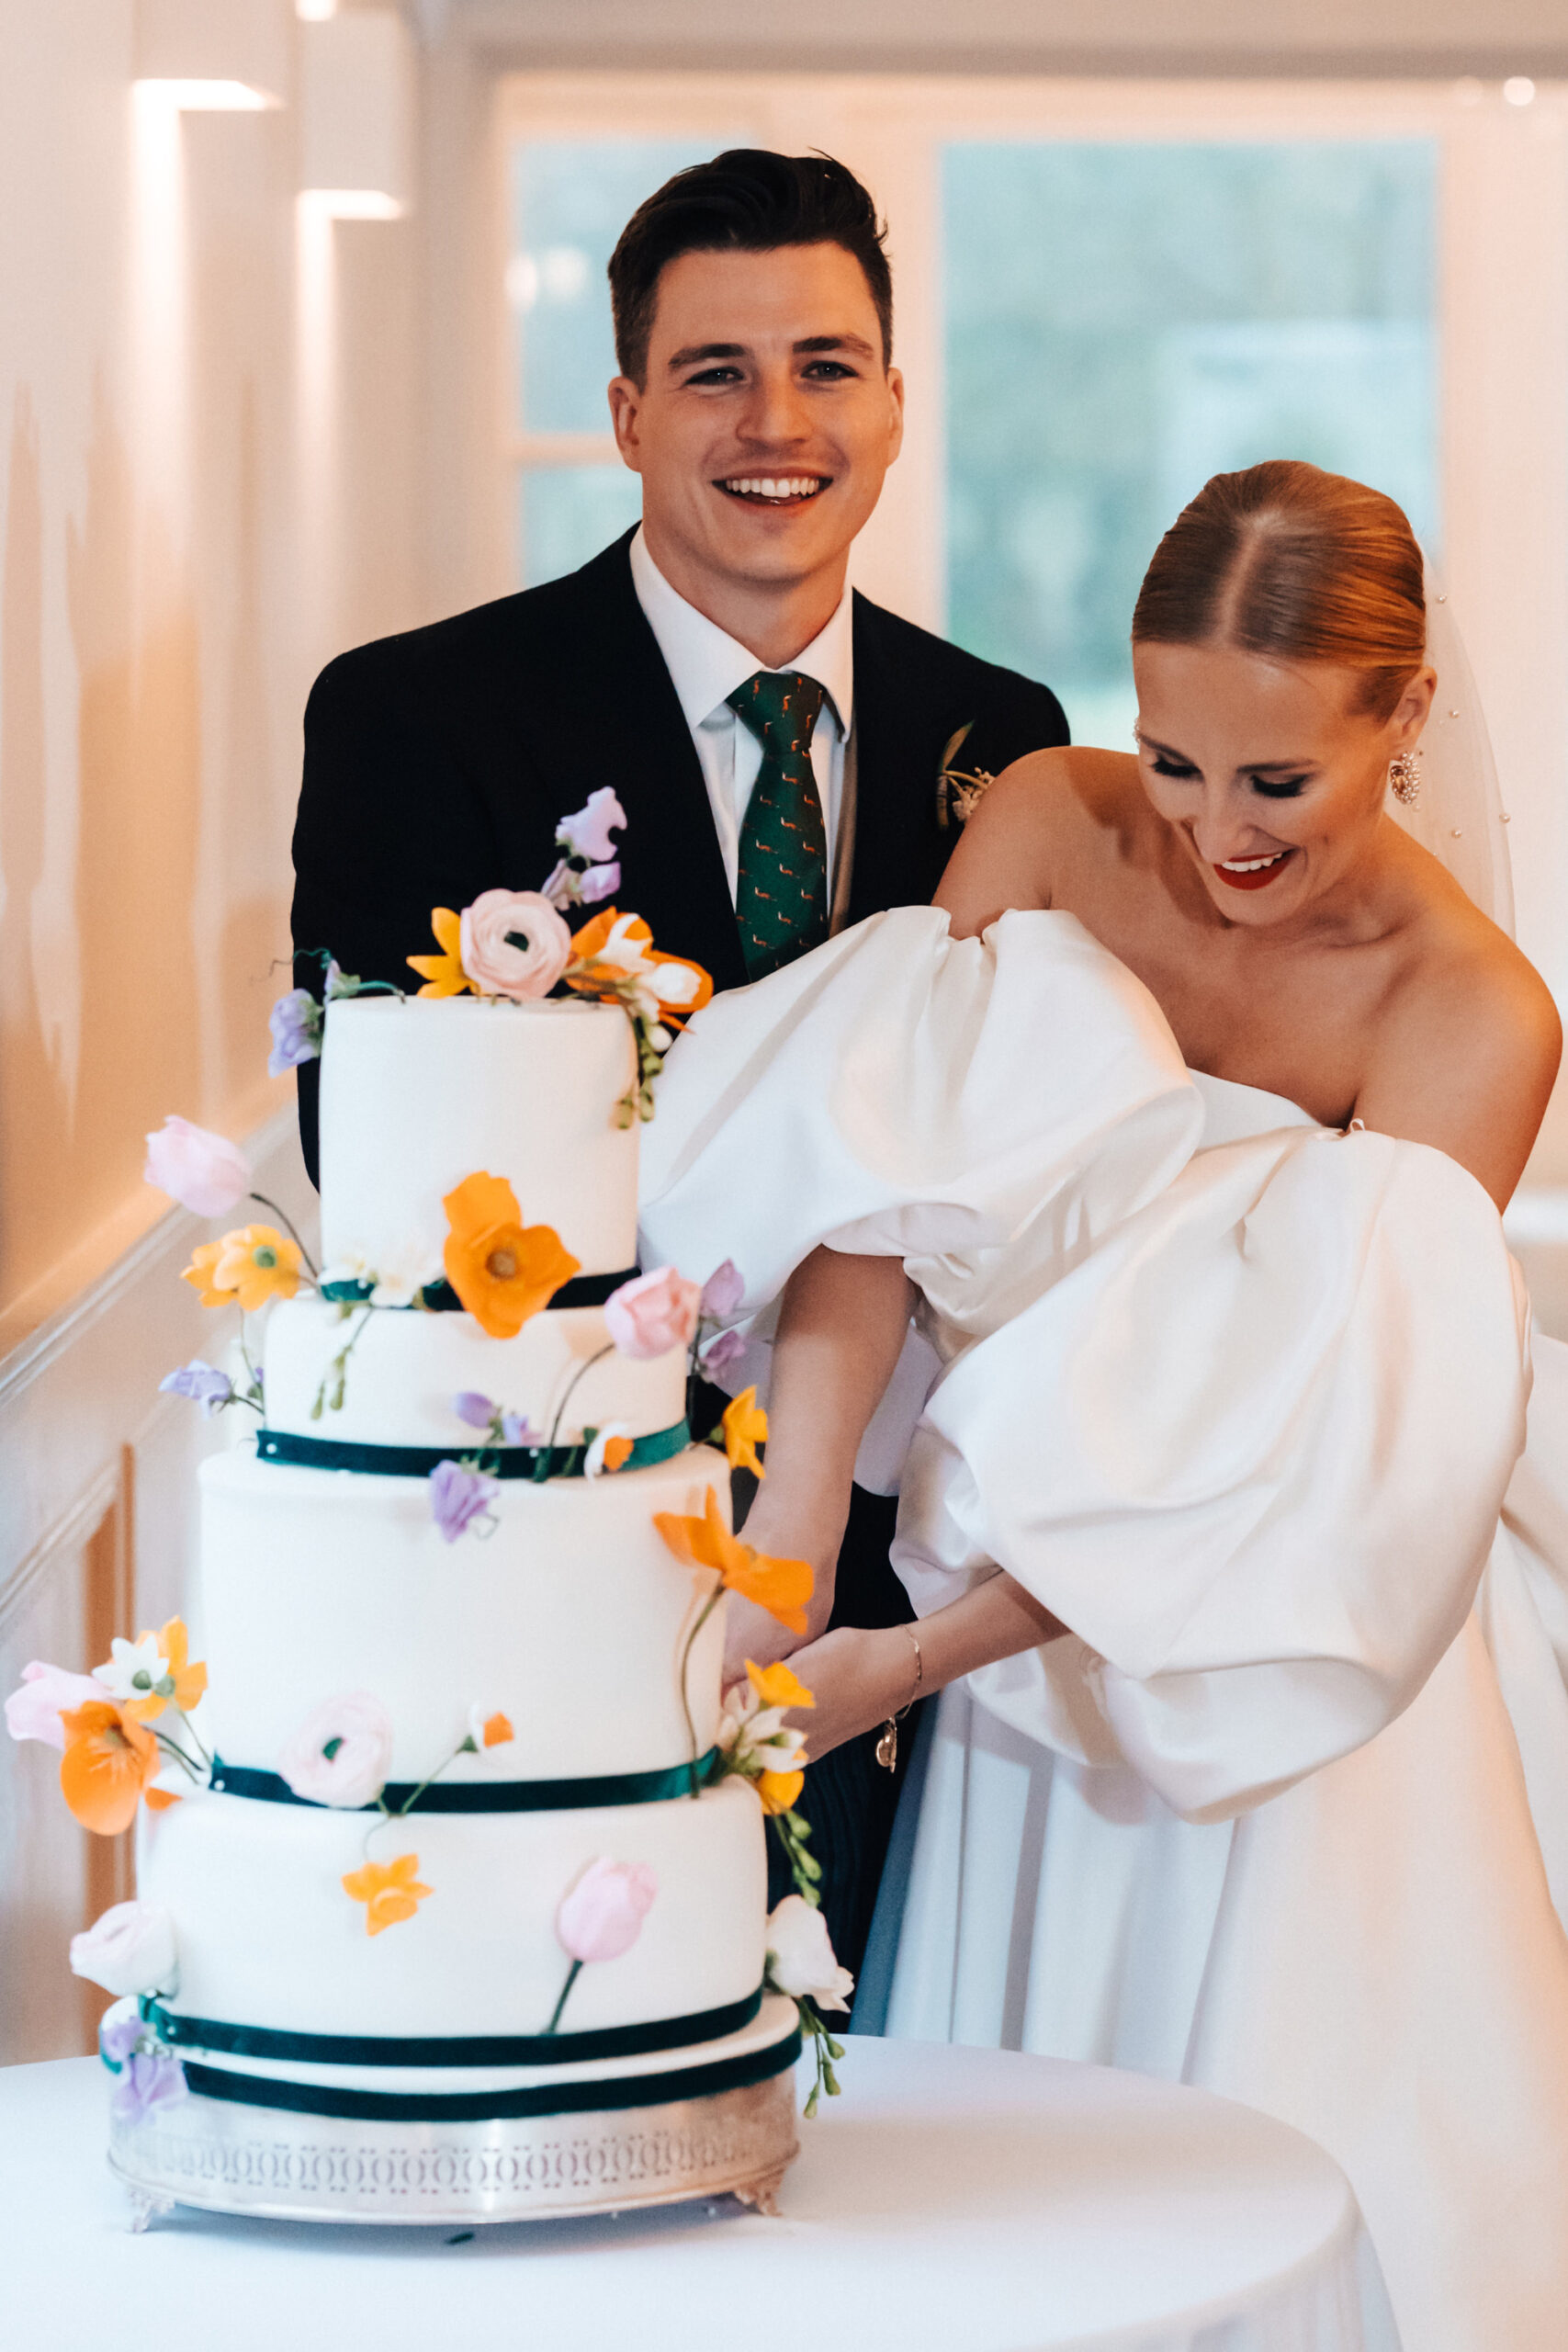 Bride and groom cutting their three tiered wedding cake that is covered with orange sugar flowers and black ribbon detailing